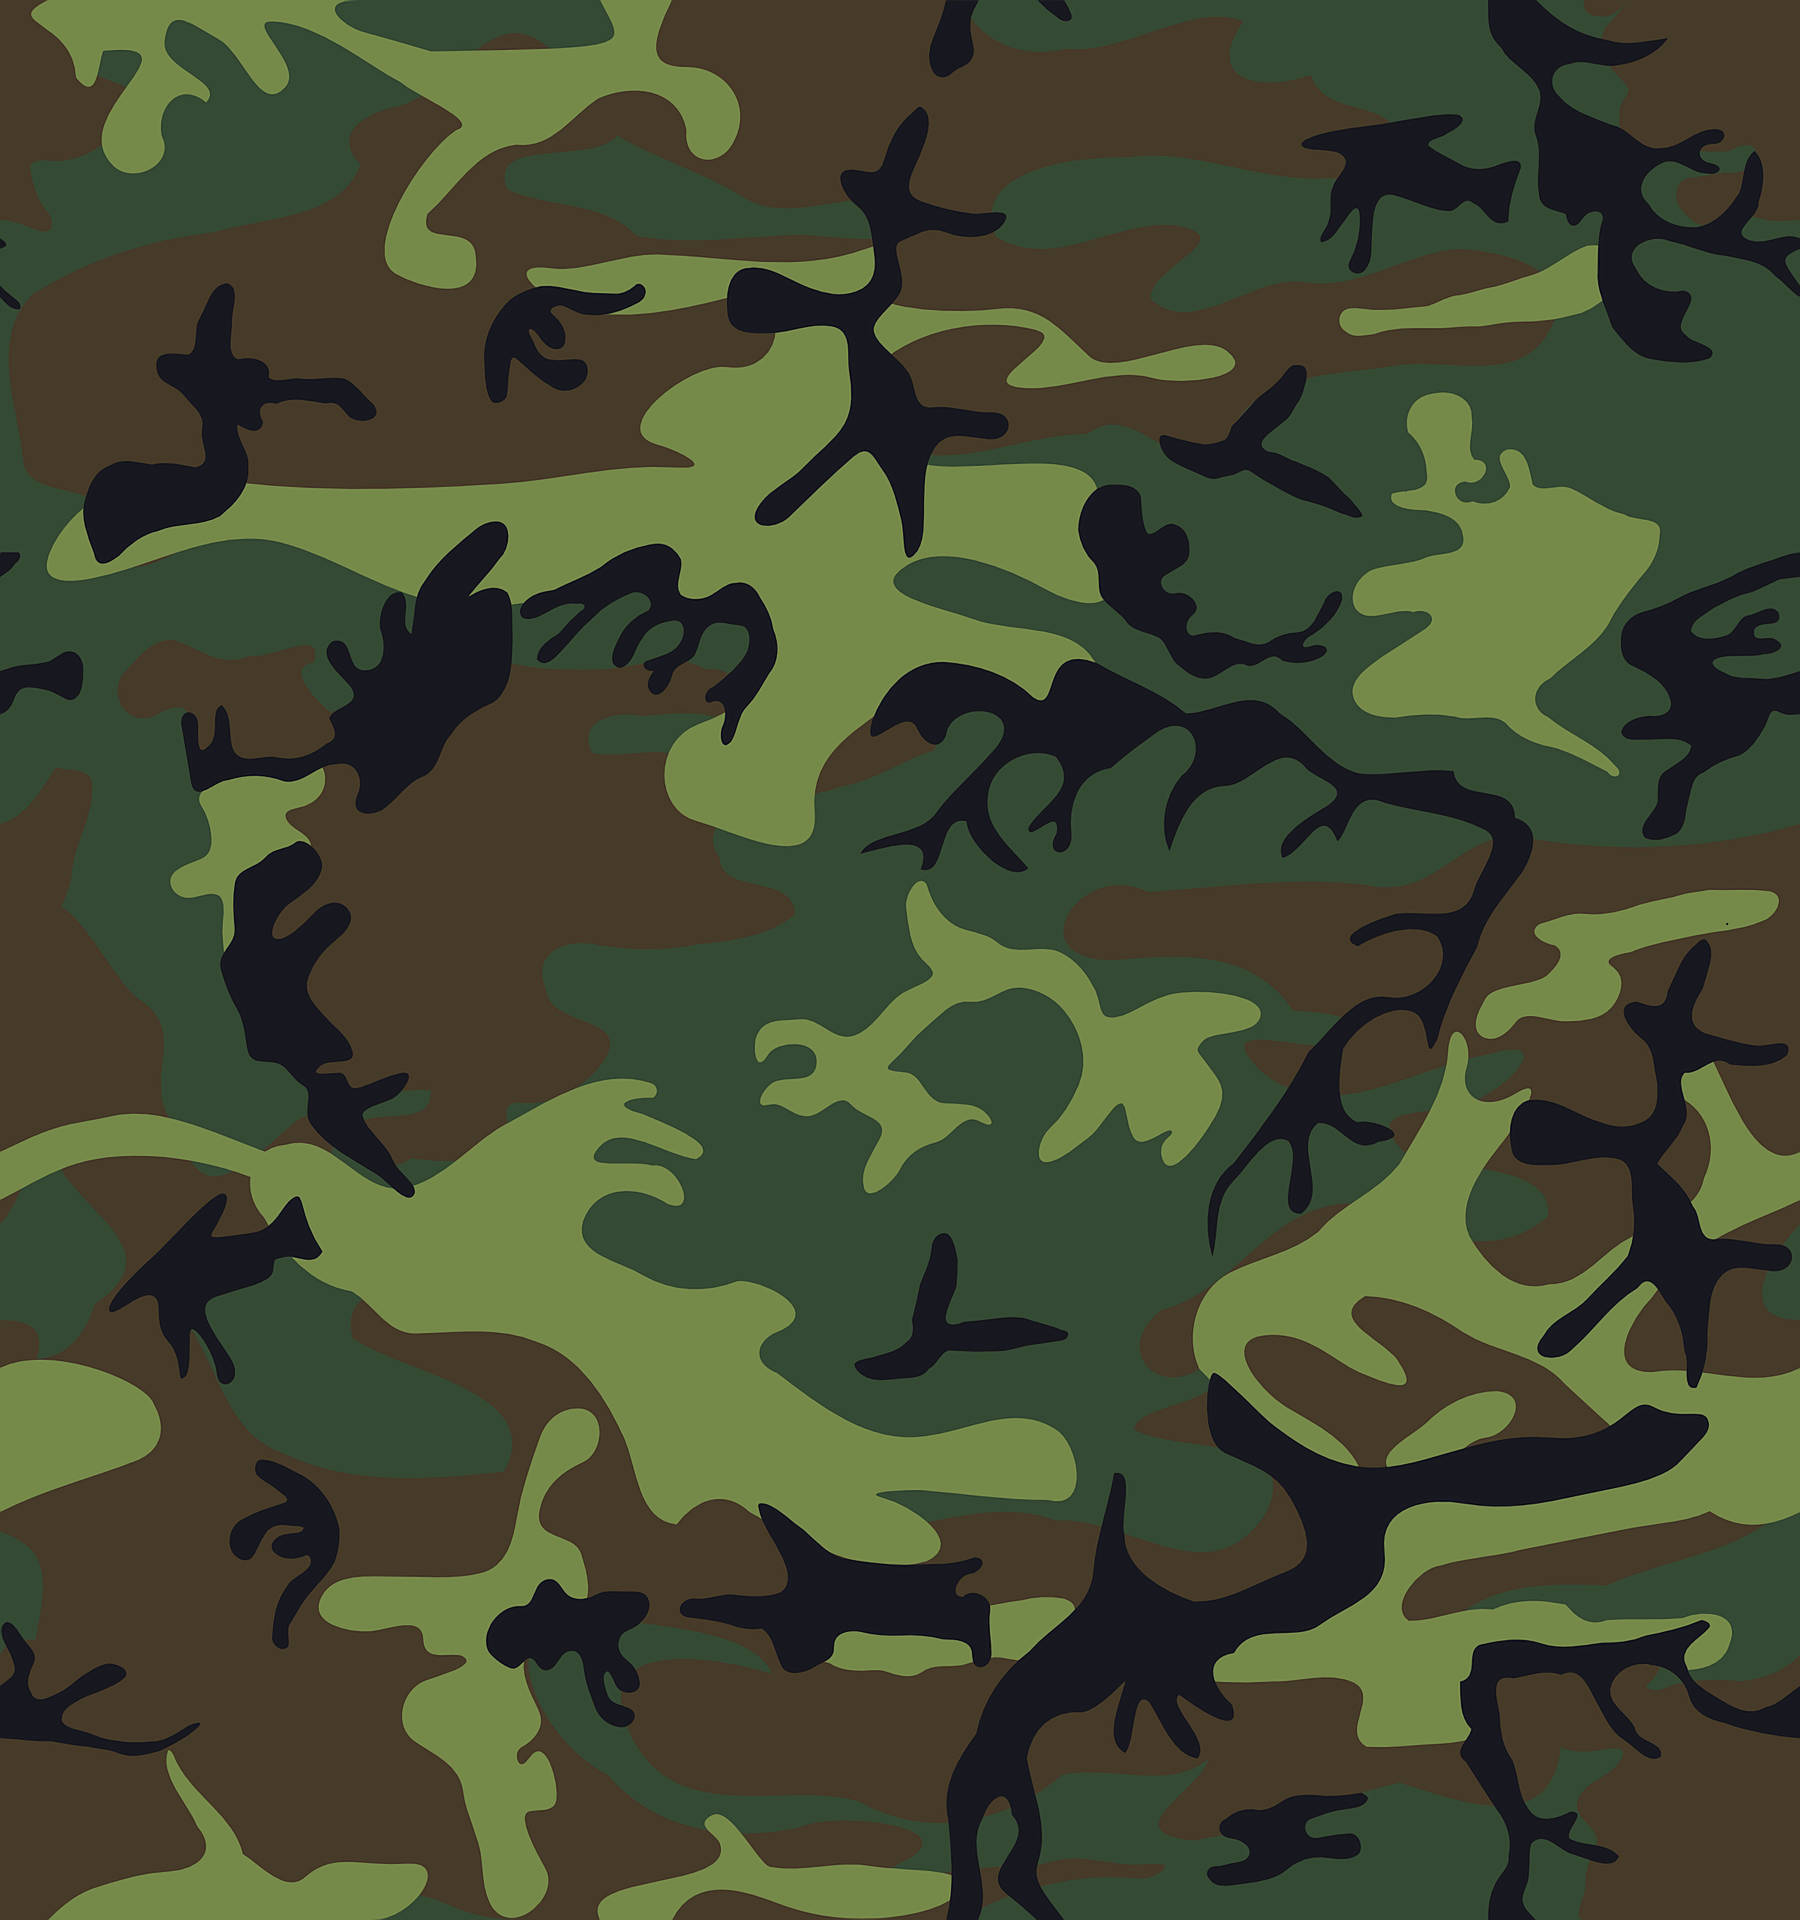 1 x A4 Printed Green Army Camouflage Wallpaper Decor Icing Sheet Edible  Cake Topper Decorated Sheet - Perfect for Large Cakes : Amazon.co.uk:  Grocery